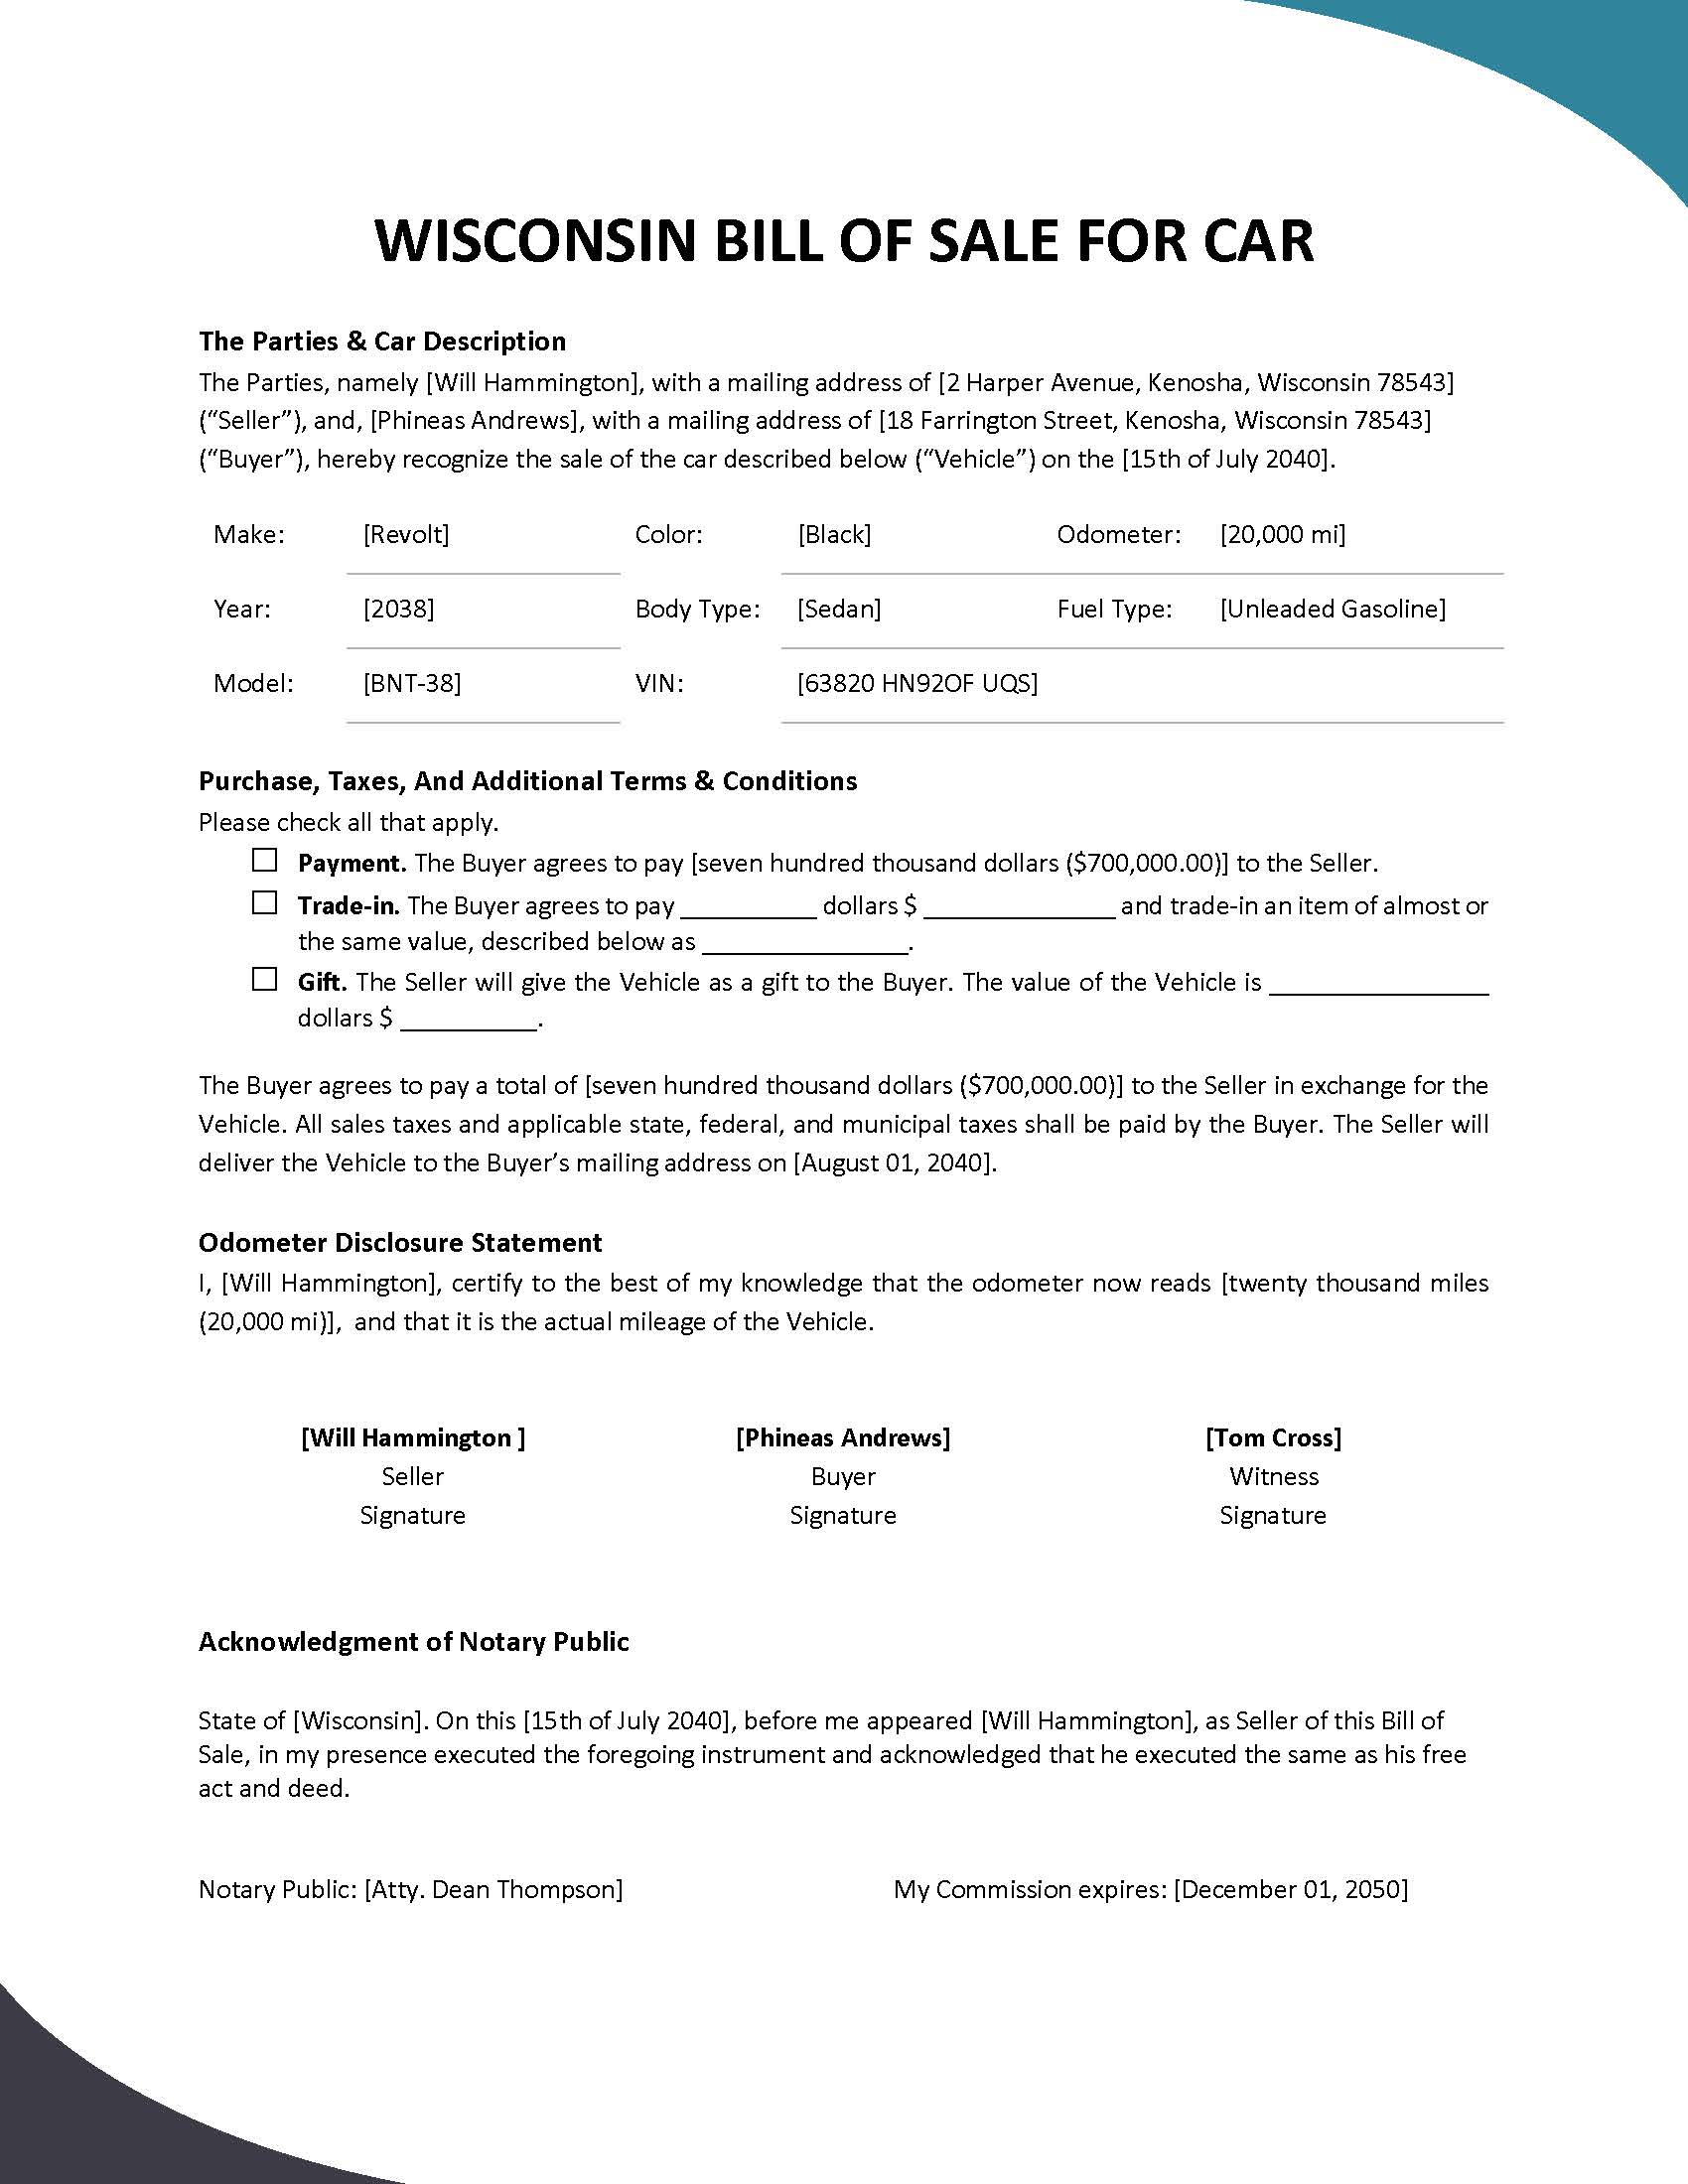 Wisconsin Bill of Sale For Car Template